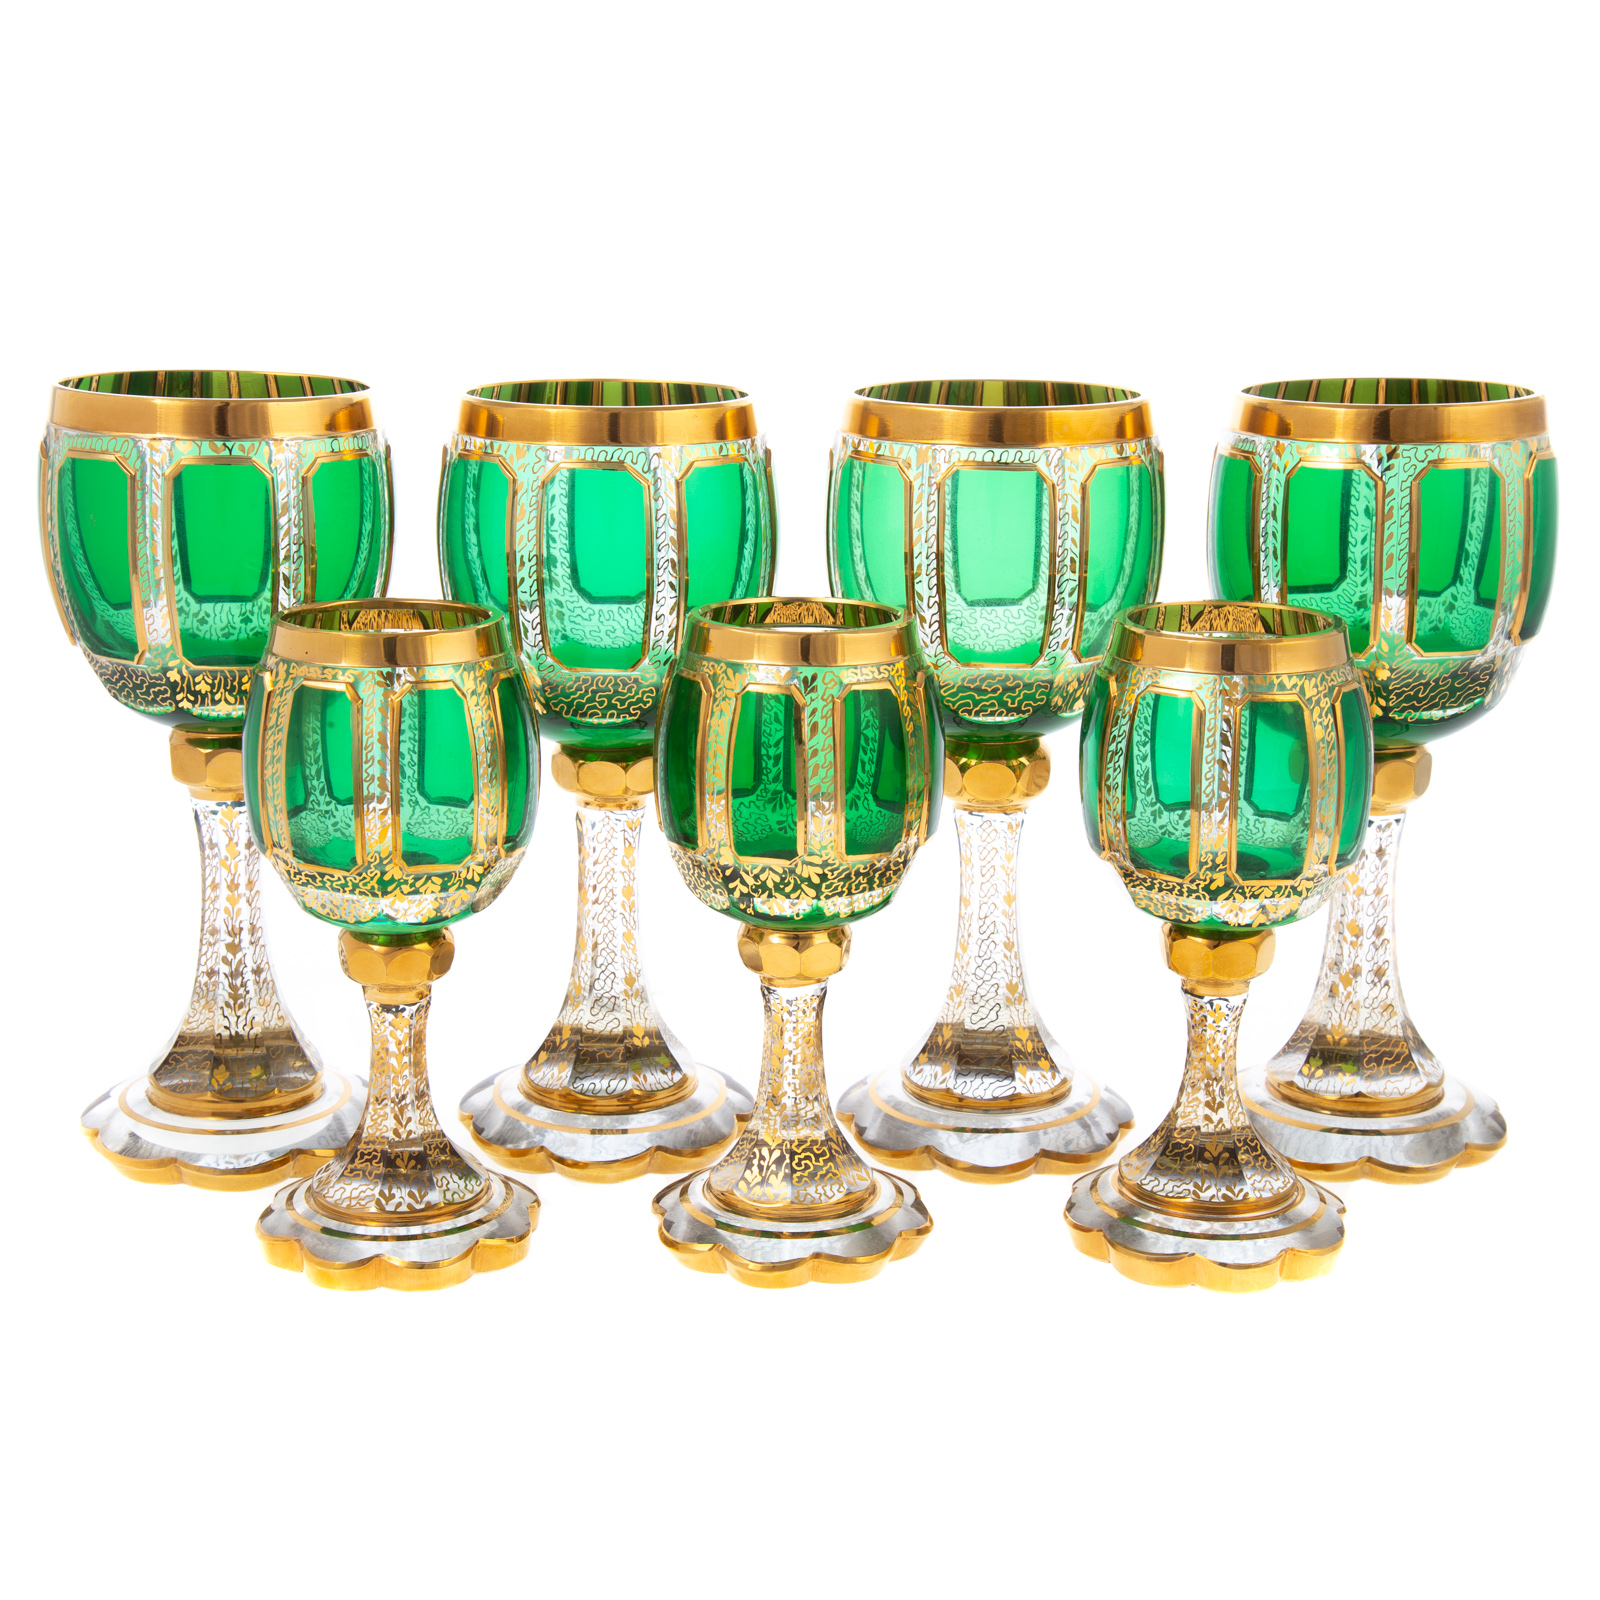 19 CONTINENTAL GLASS WINE GOBLETS